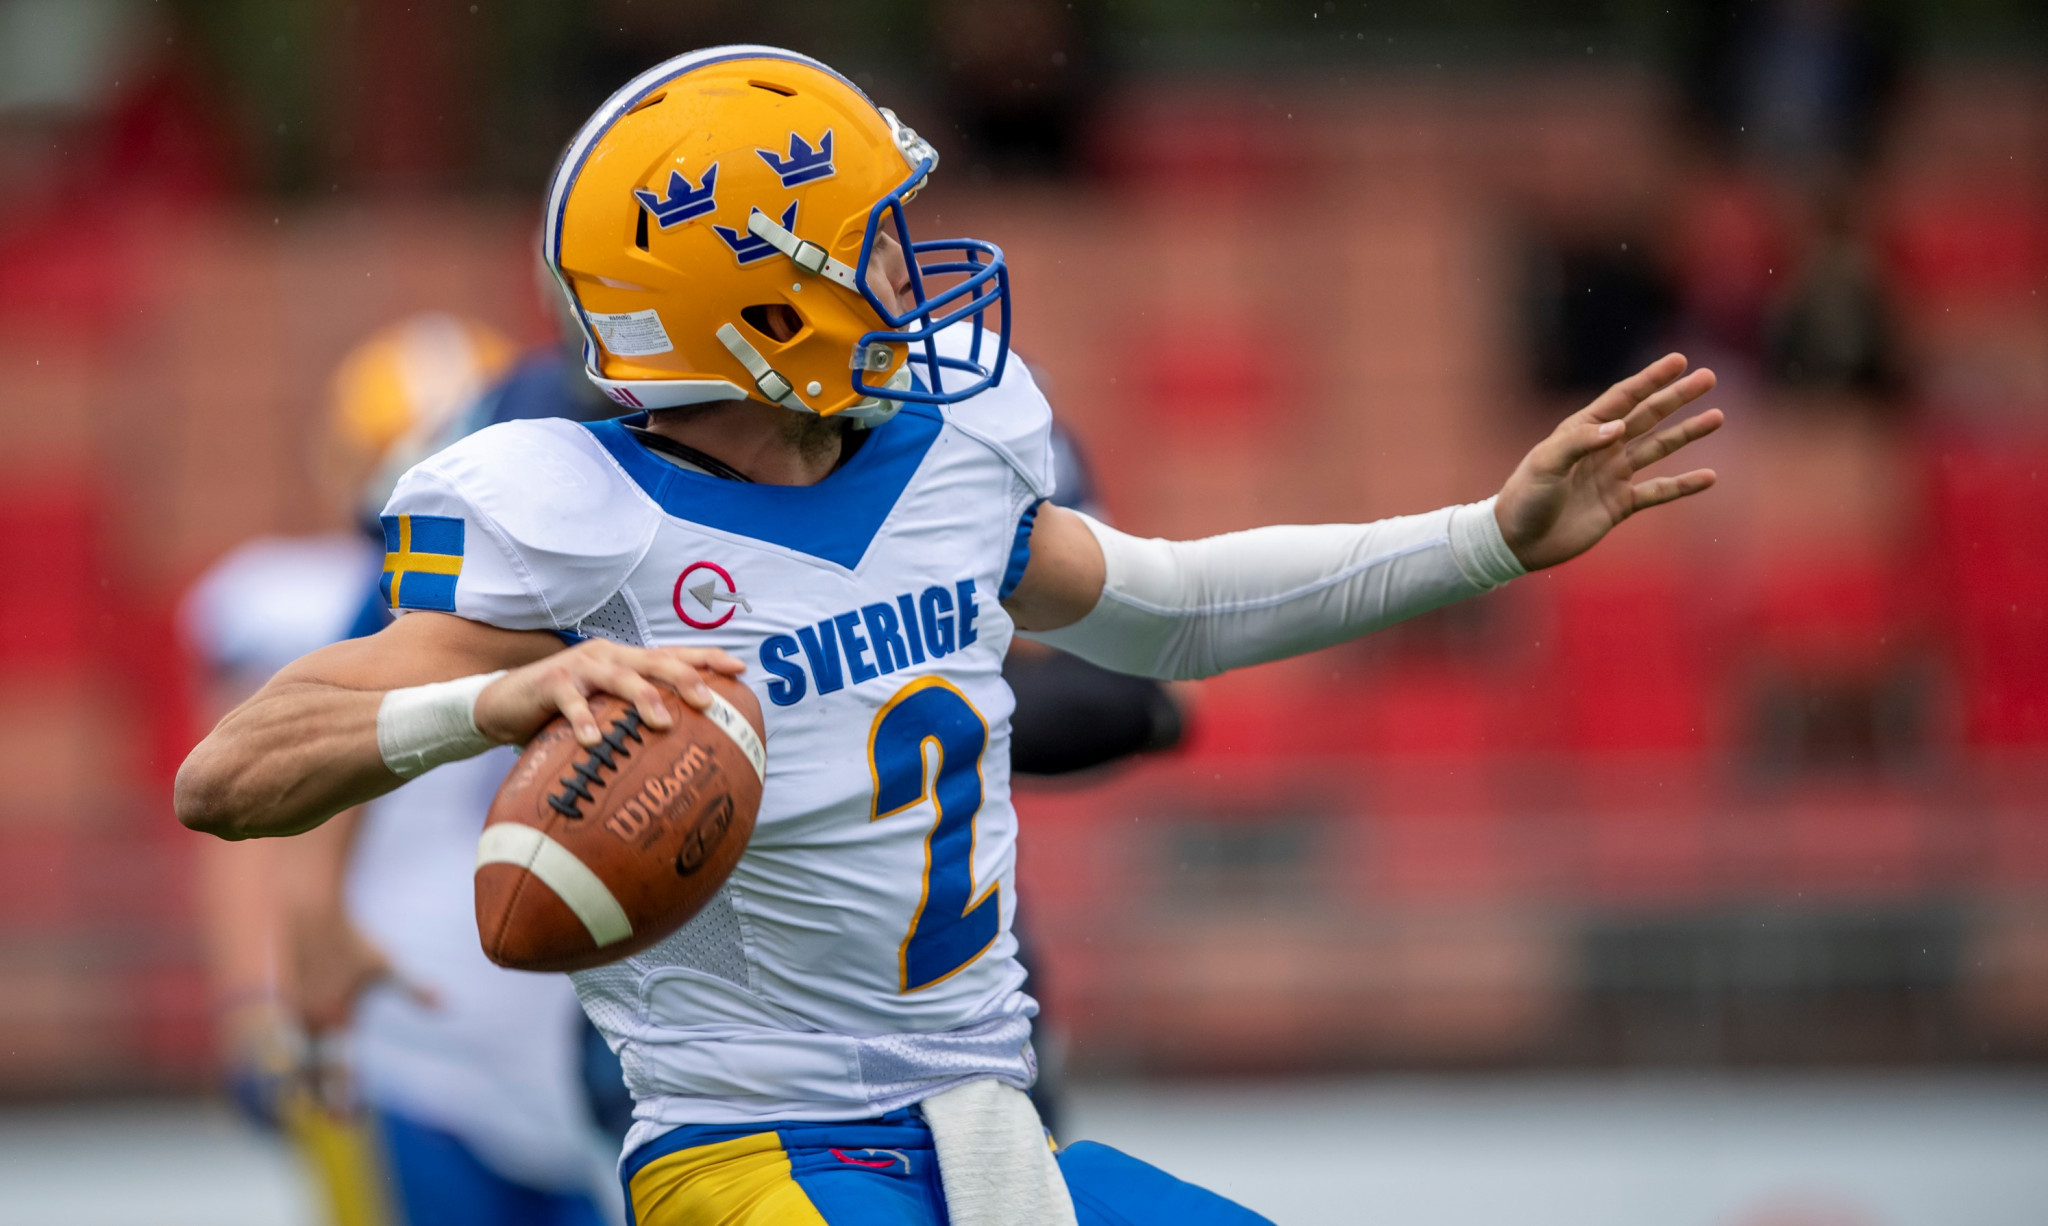 The 2015 IFAF World Championship was originally going to be held in Sweden, however, organisers had to move the event to the United States due to lack of sponsorship ©IFAF